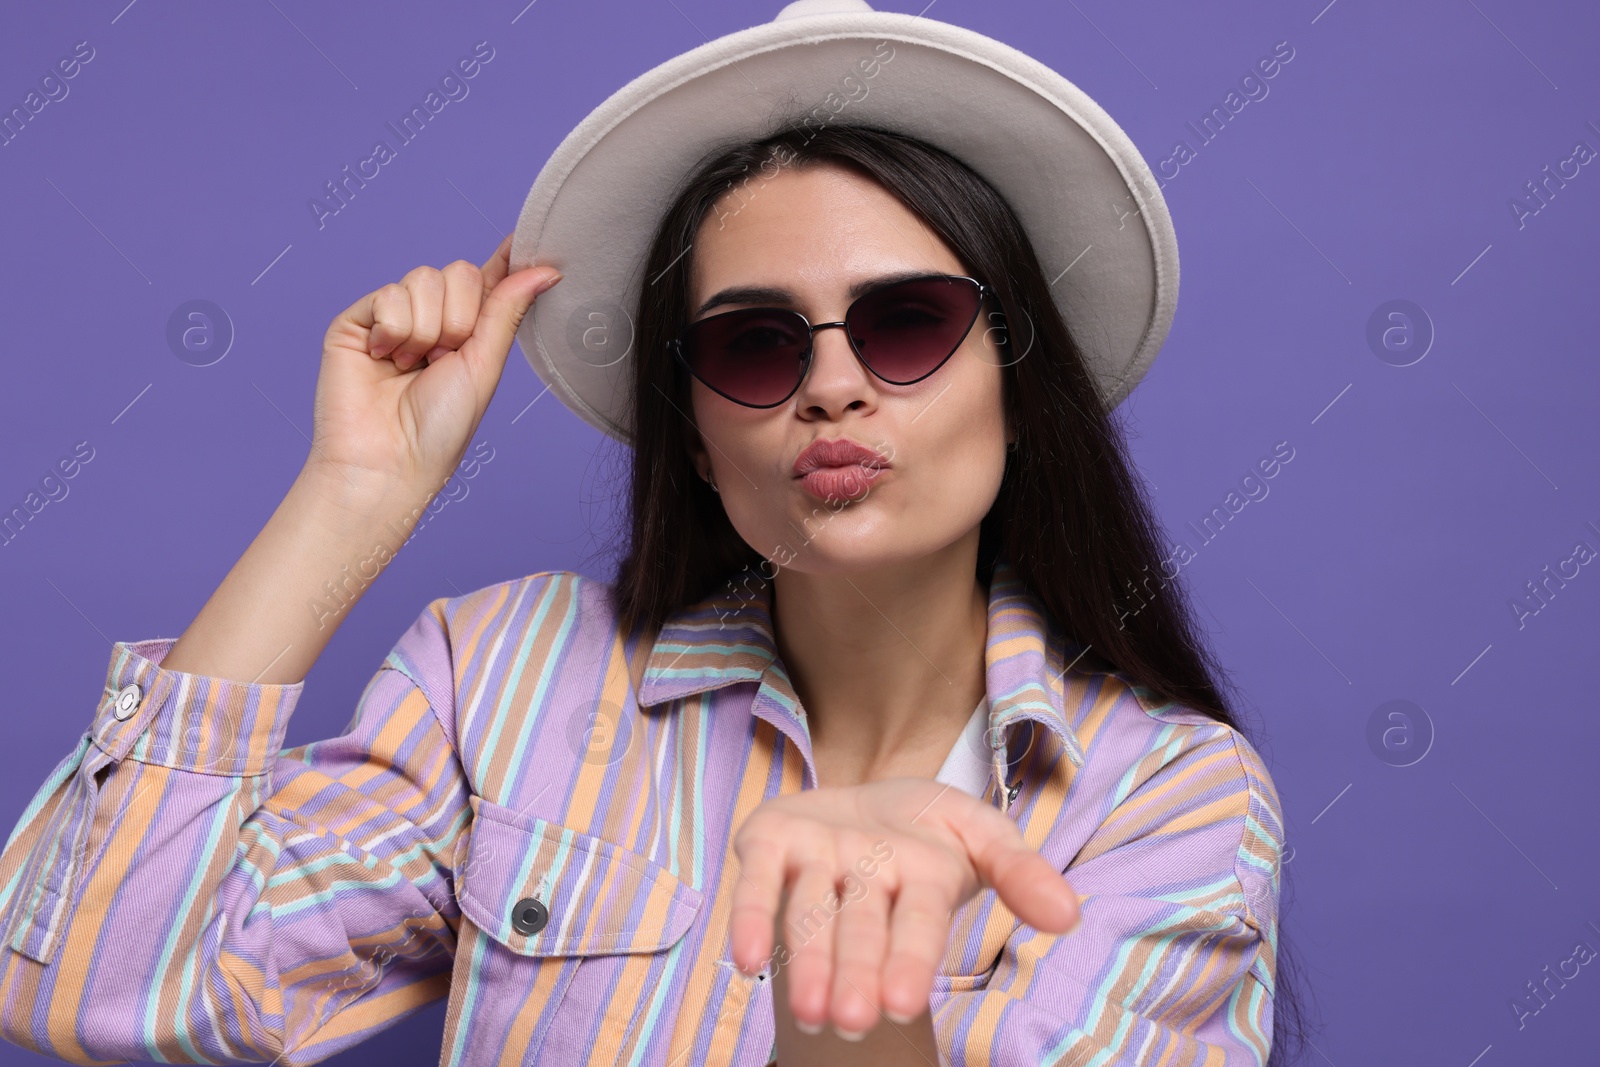 Photo of Beautiful young woman with stylish hat blowing kiss on purple background